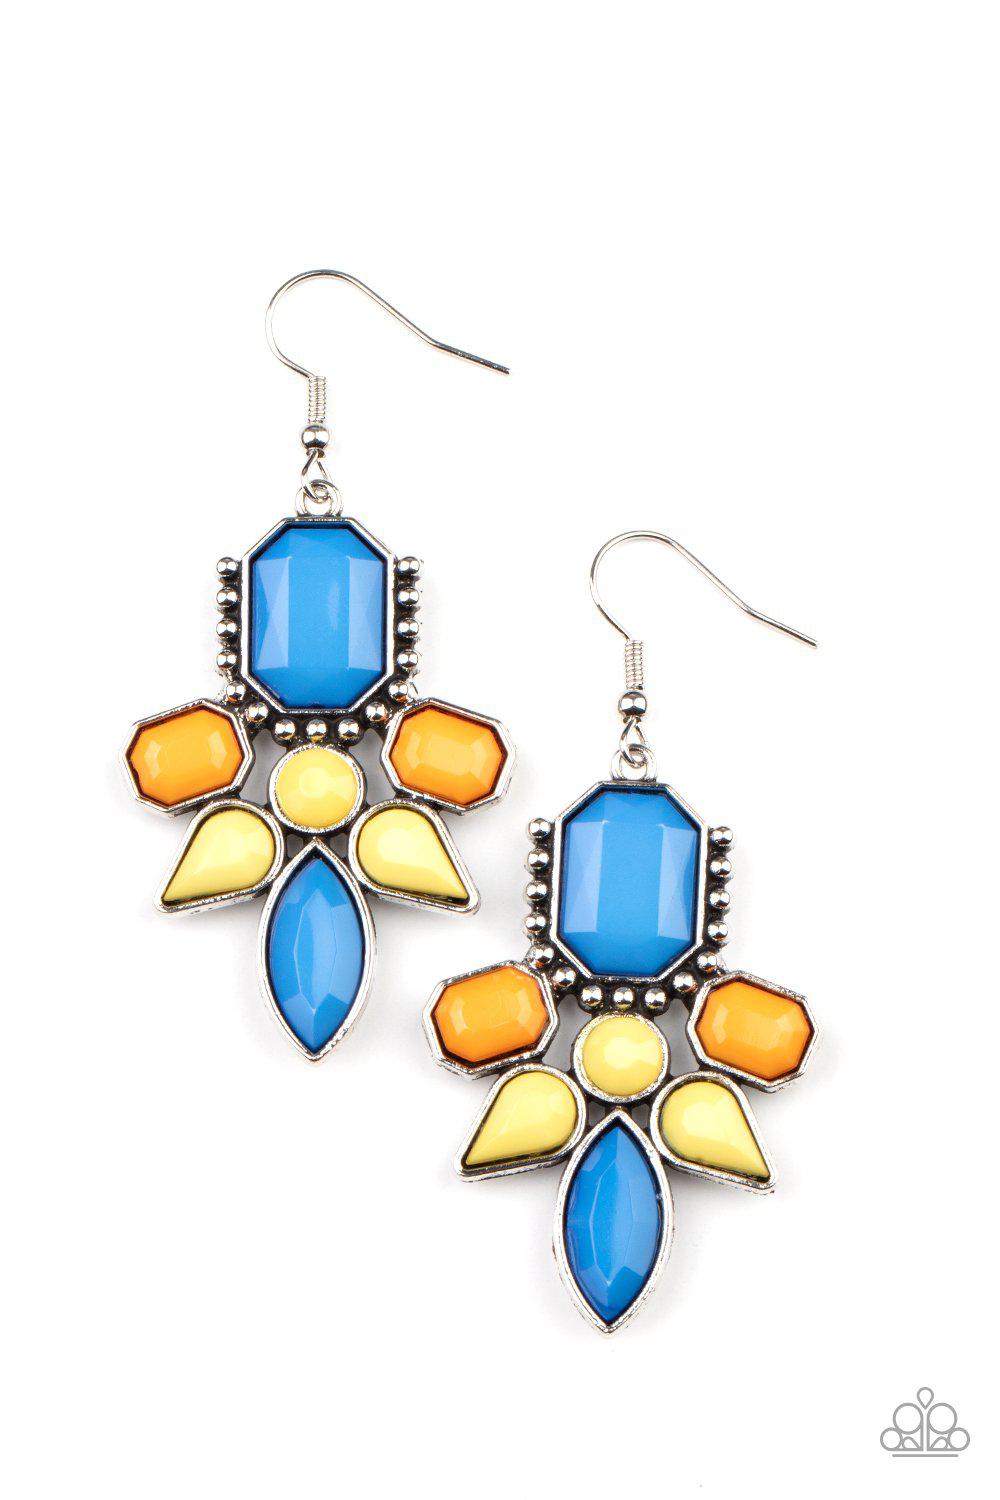 Vacay Vixen Multi Blue, Yellow and Marigold Earrings - Paparazzi Accessories- lightbox - CarasShop.com - $5 Jewelry by Cara Jewels